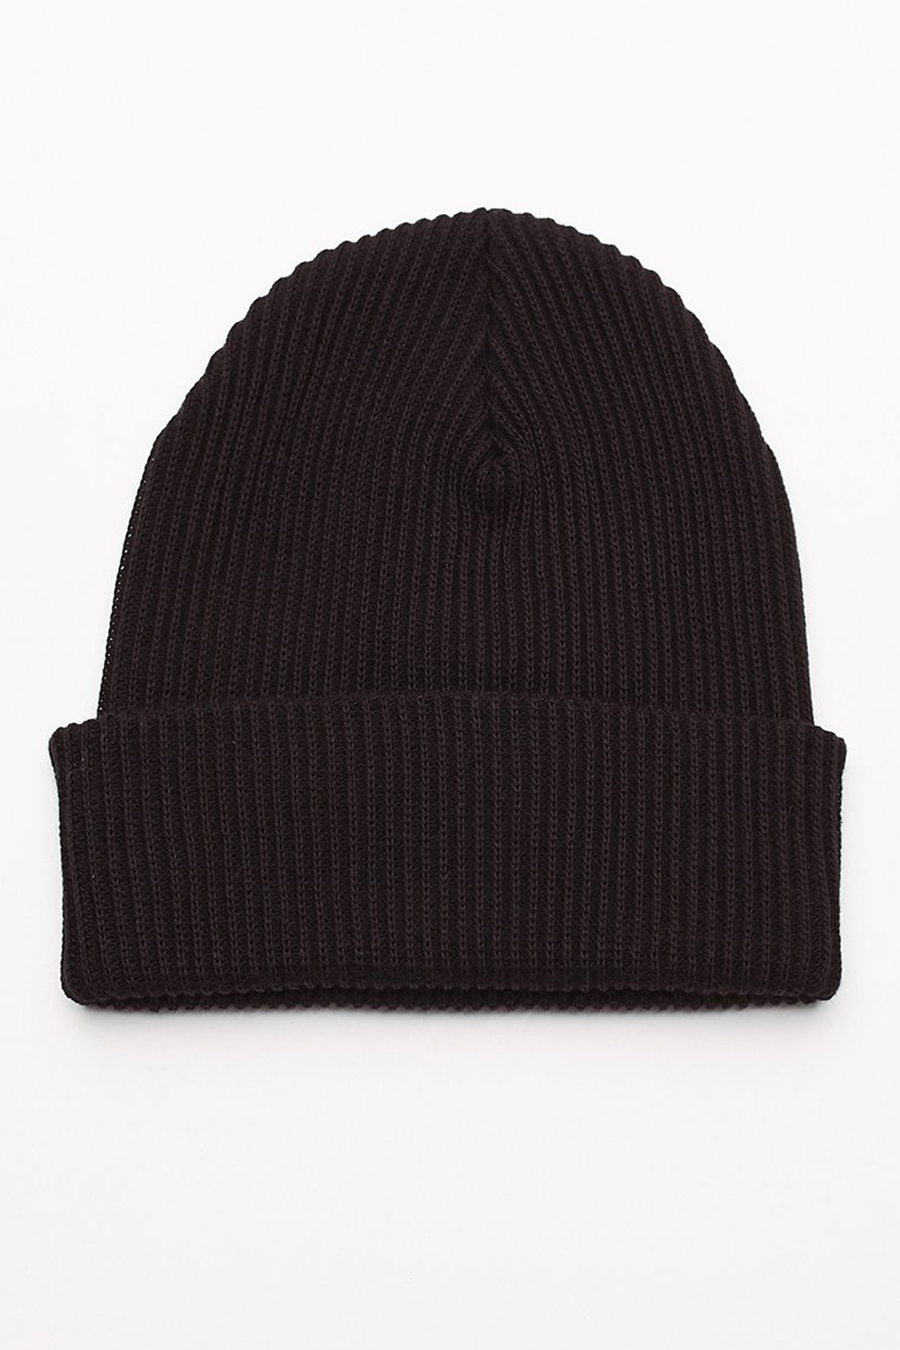 Ideals Organic Beanie | Black - West of Camden - Main Image Number 4 of 4